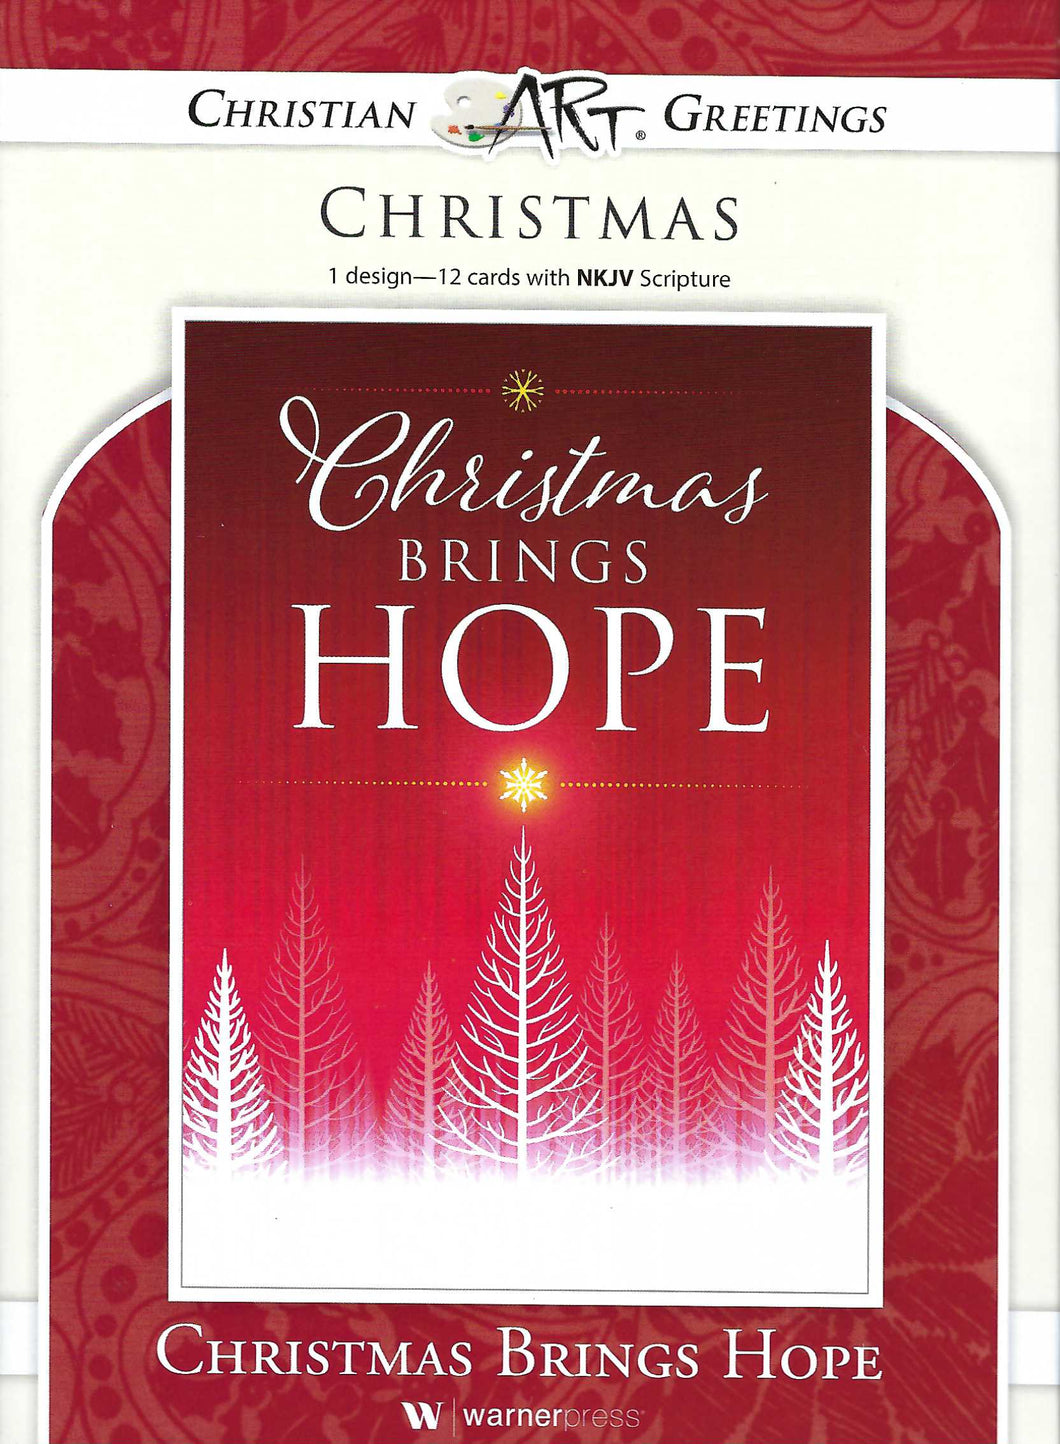 G9231X - Christmas Brings Hope, John 10:10 (NKJV) - Christmas Greeting Cards - Motivational Bible Verse Cards - Scripture Cards with Bible Verses - Box of 12